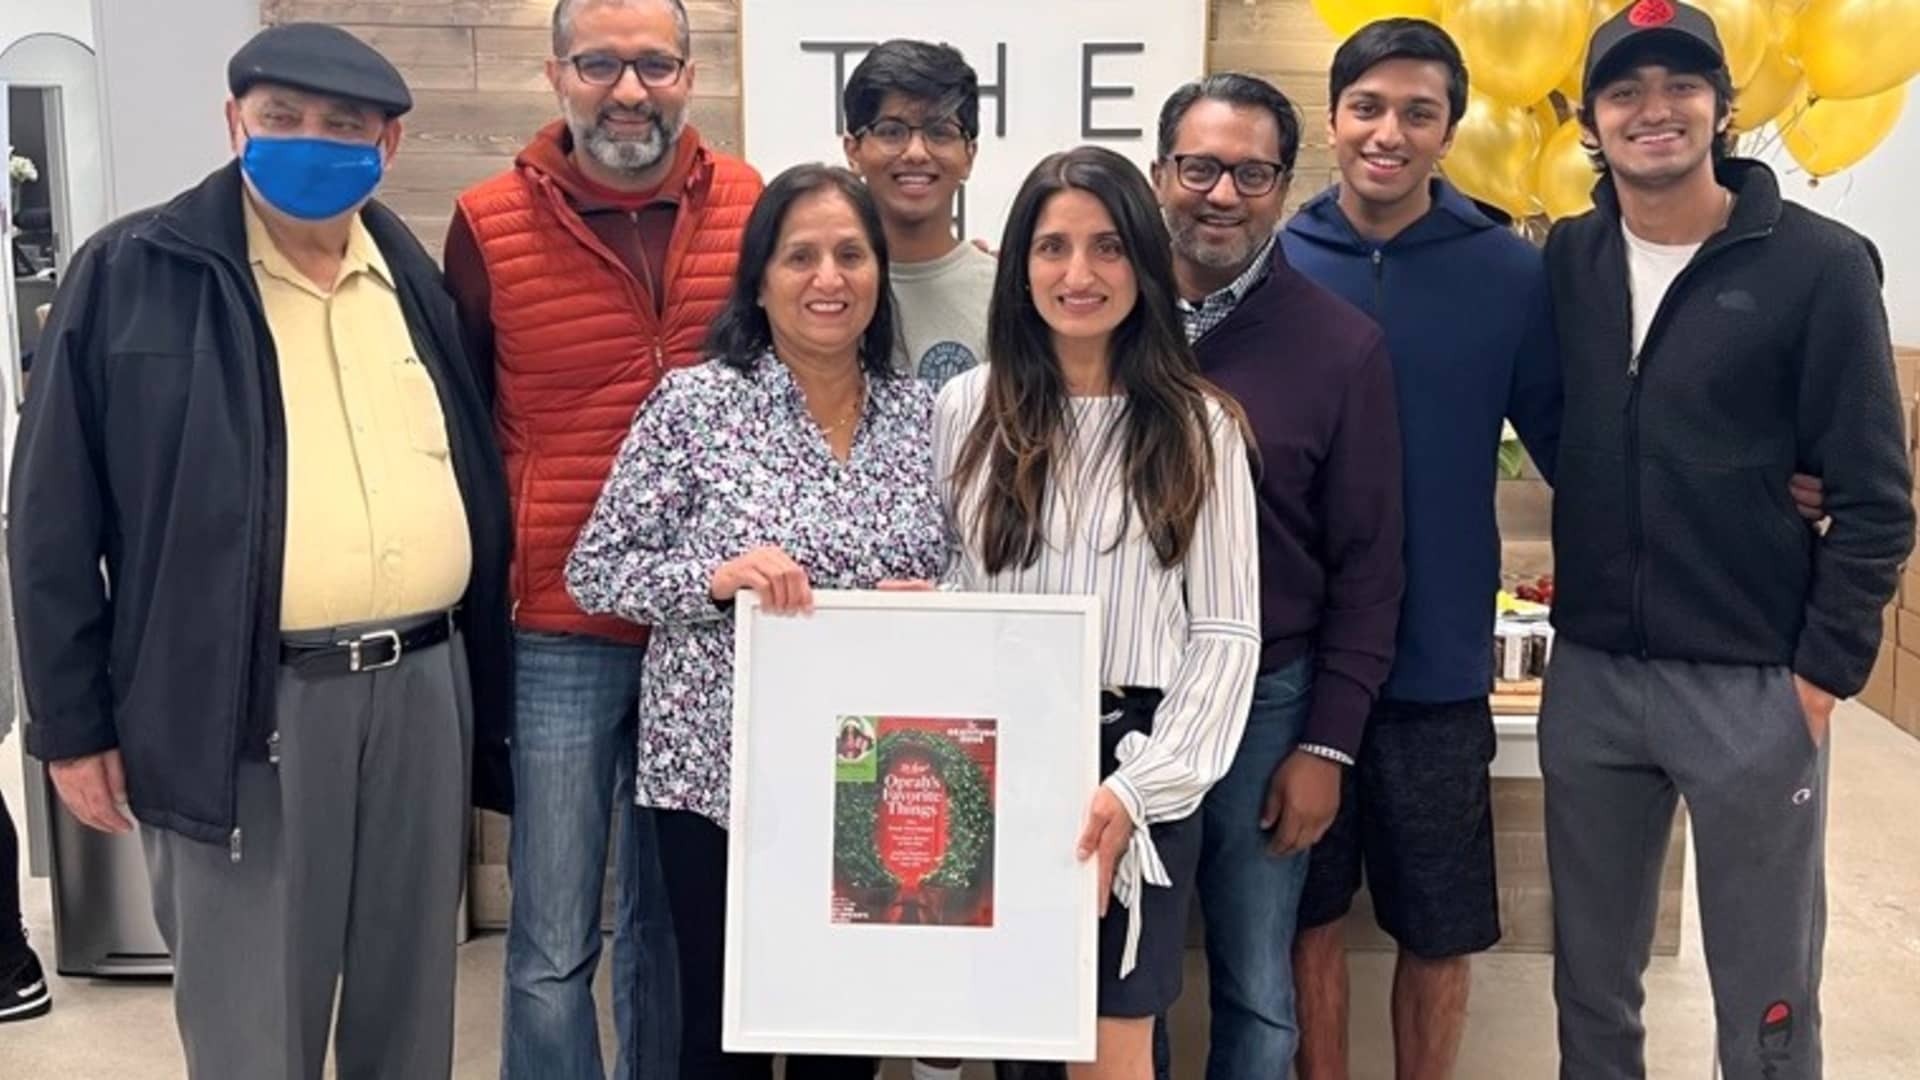 Sunny and family celebrate The Chai Box's selection onto Oprah Favorite Things list. Sunny says has dreamed of making chai for Winfrey since she was little.